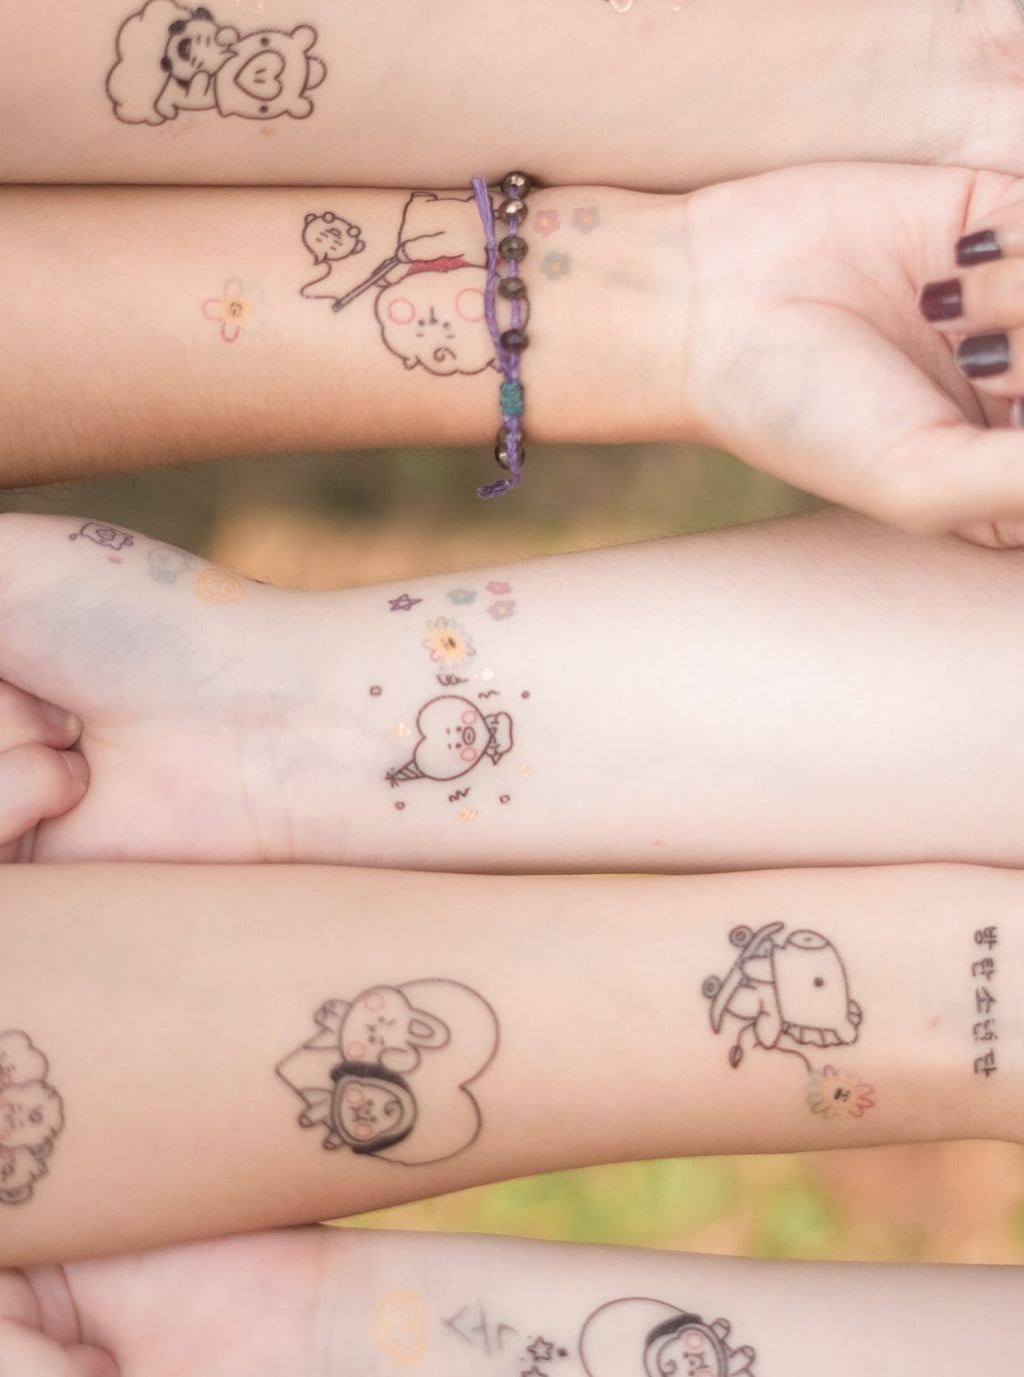 Problem Solved: How A Tattoo Made Organ Donation Easy | LBBOnline